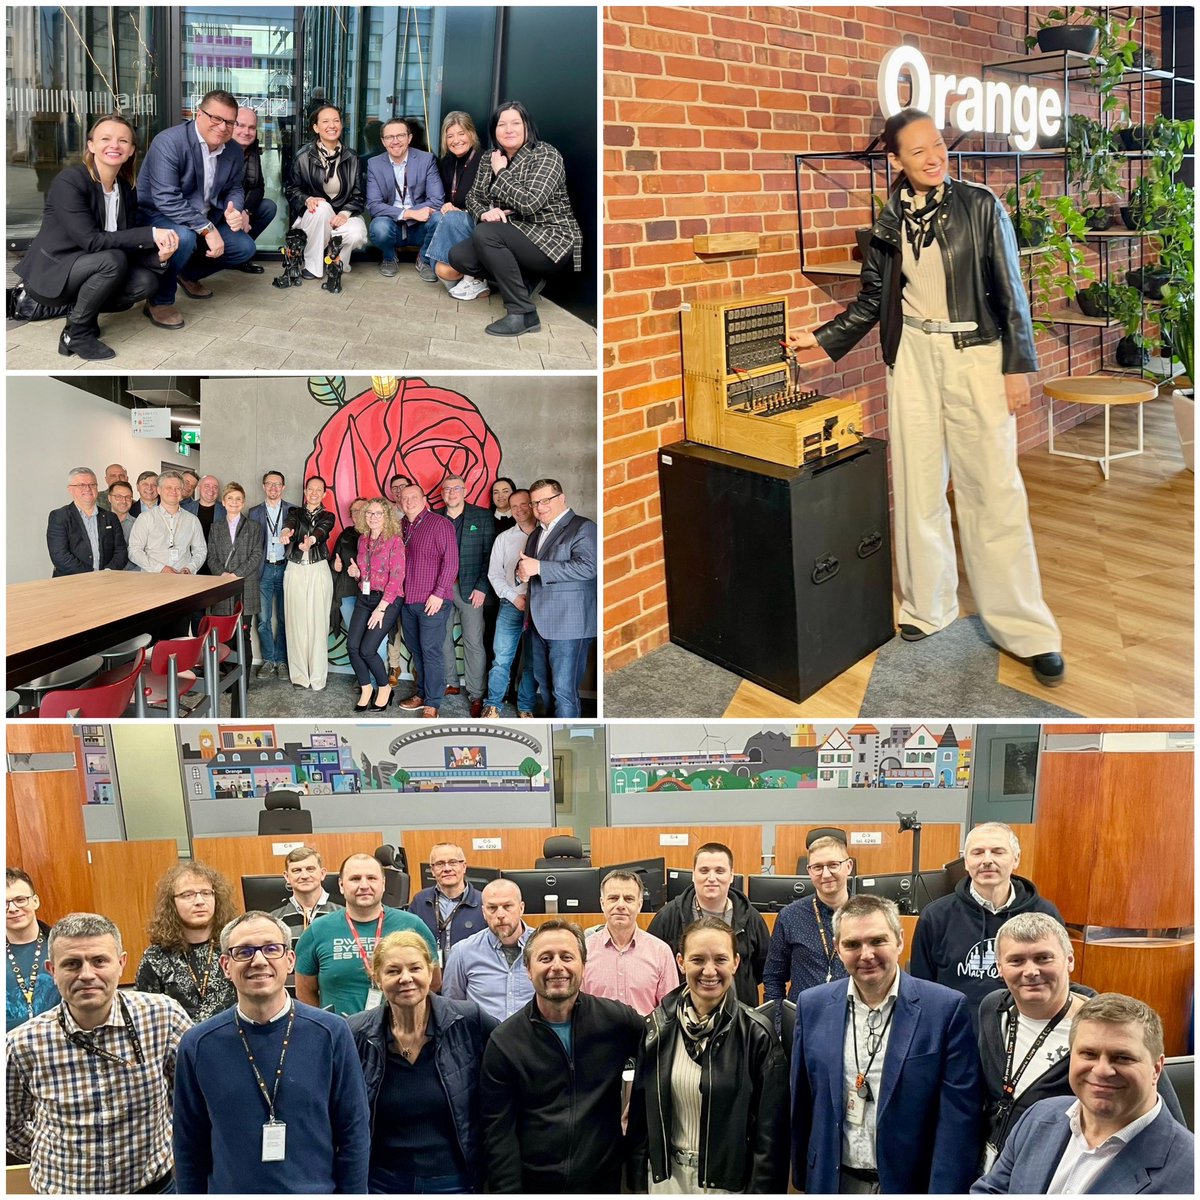 A day that only comes once in four years - 29th of February 😉 Inspiring time with @Orange_Polska team in #Katowice. Strong focus on technology, efficiency & reliability today. A great opportunity to visit the Global Network Operations Centre securing highest quality network…